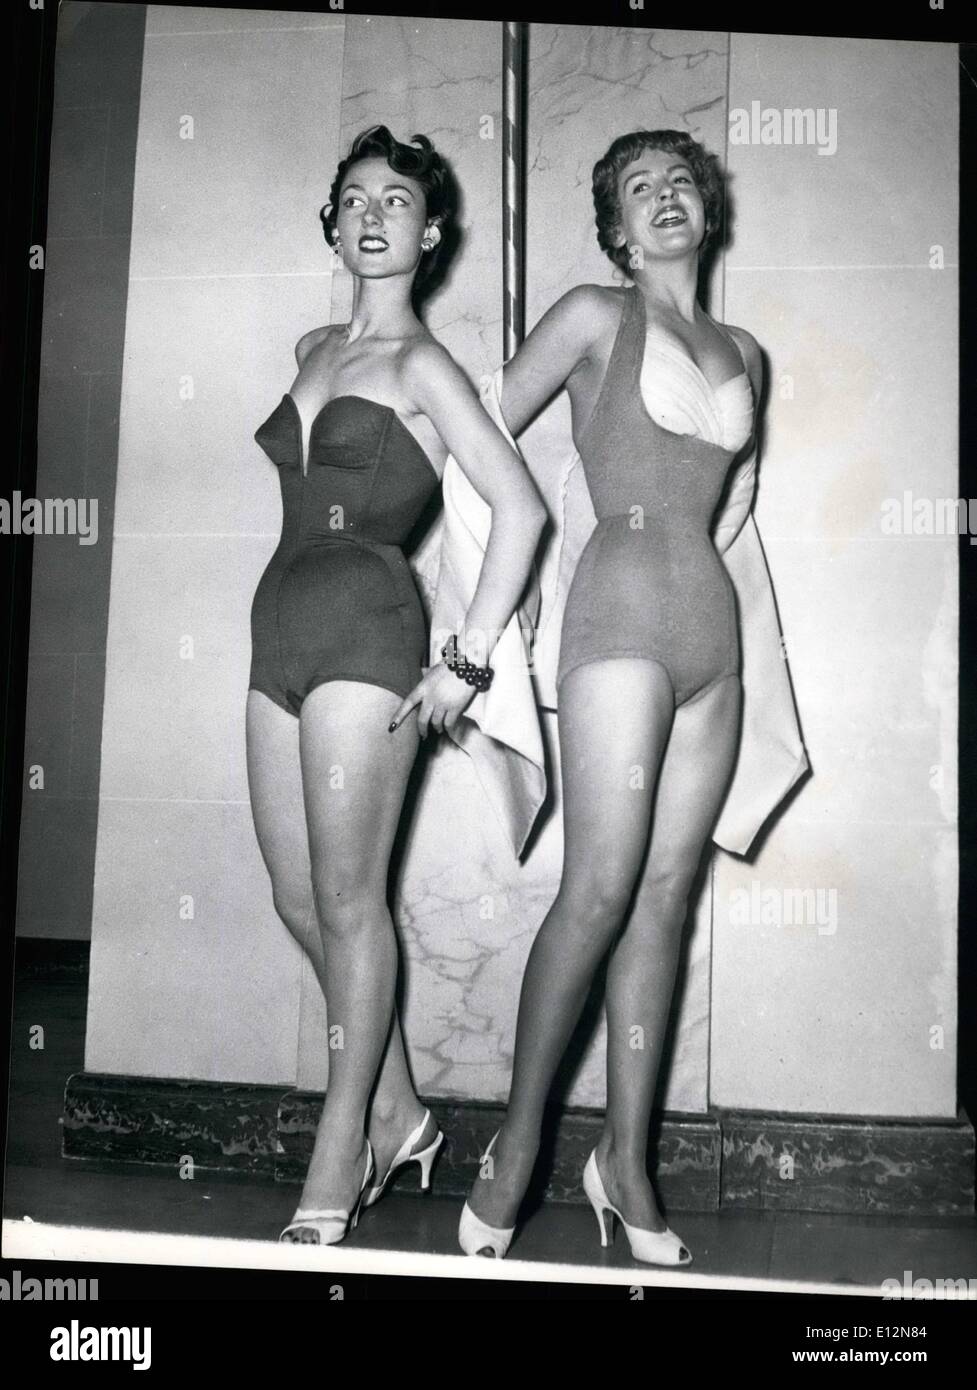 Feb. 24, 2012 - Paris Styles For 1953 Swim Season: Two charming styles for 1953 seen at Paris fashion show. On left strapless suit with plunge neckline. On right one piece suit with bodice filled in swathed white jersey. Stock Photo